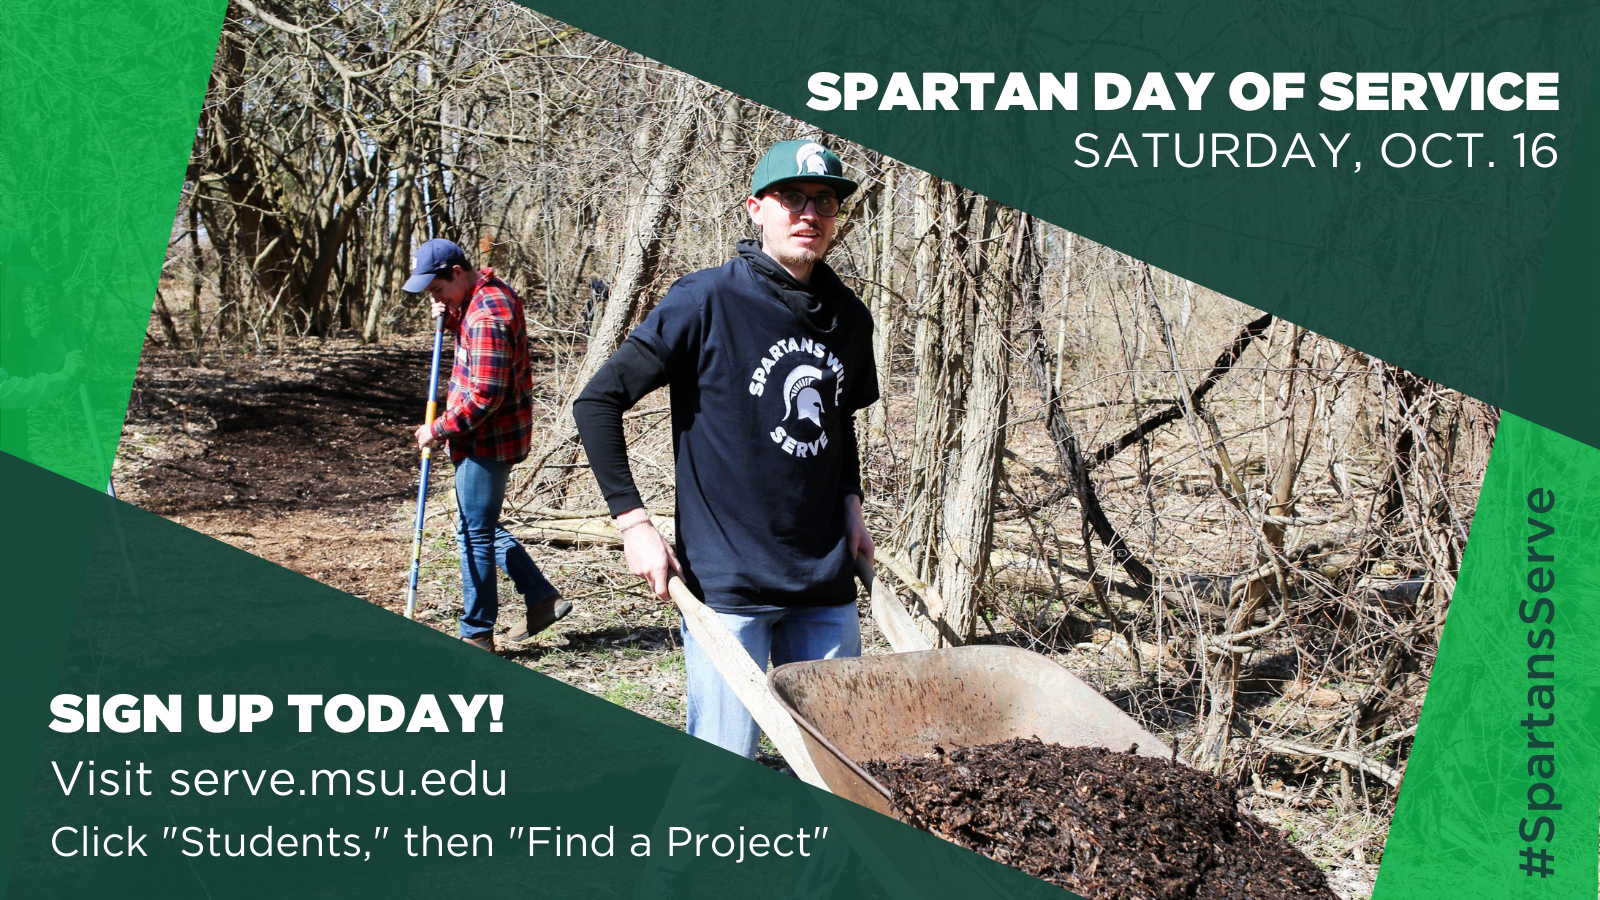 Spartan Day of Service is on Saturday Oct. 16, visit serve.msu.edu to sign up!